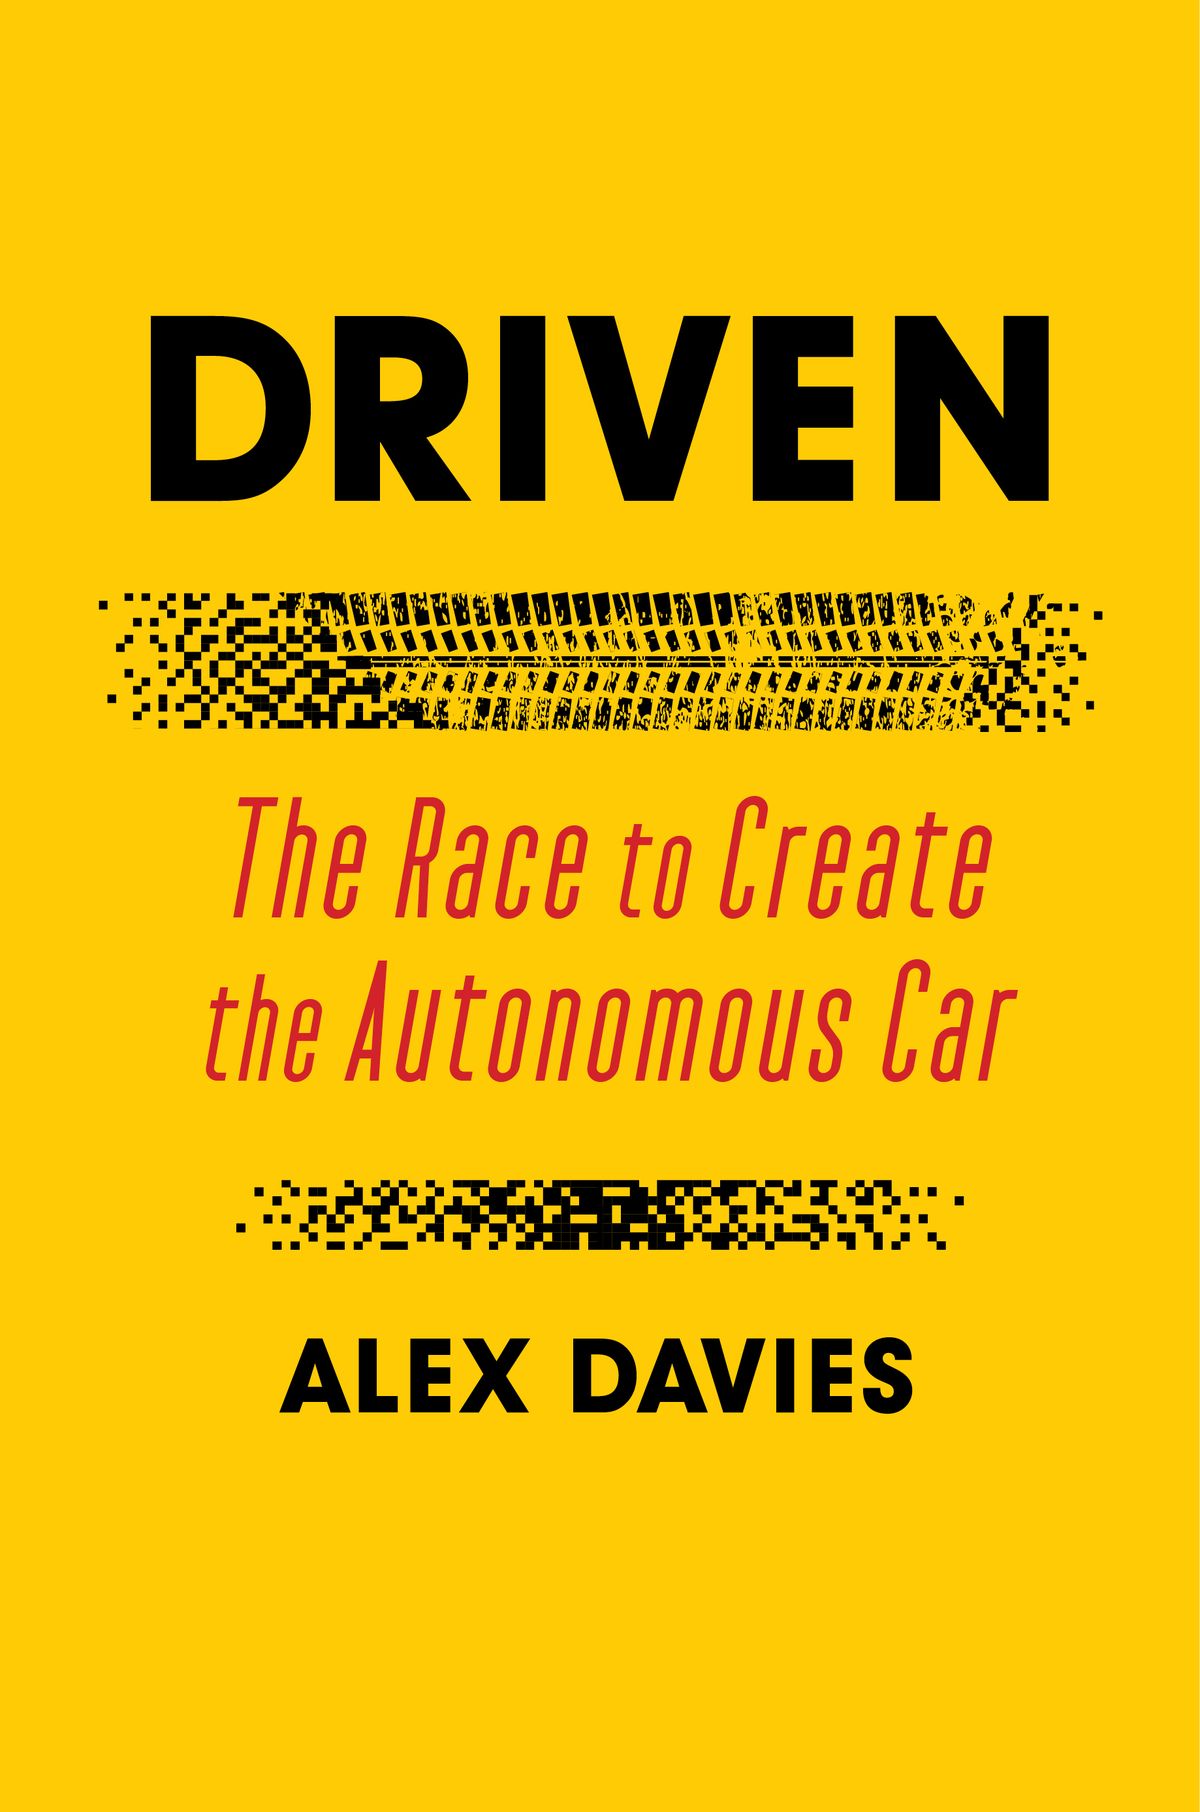 cover of the book driven the race to create the autonomous car